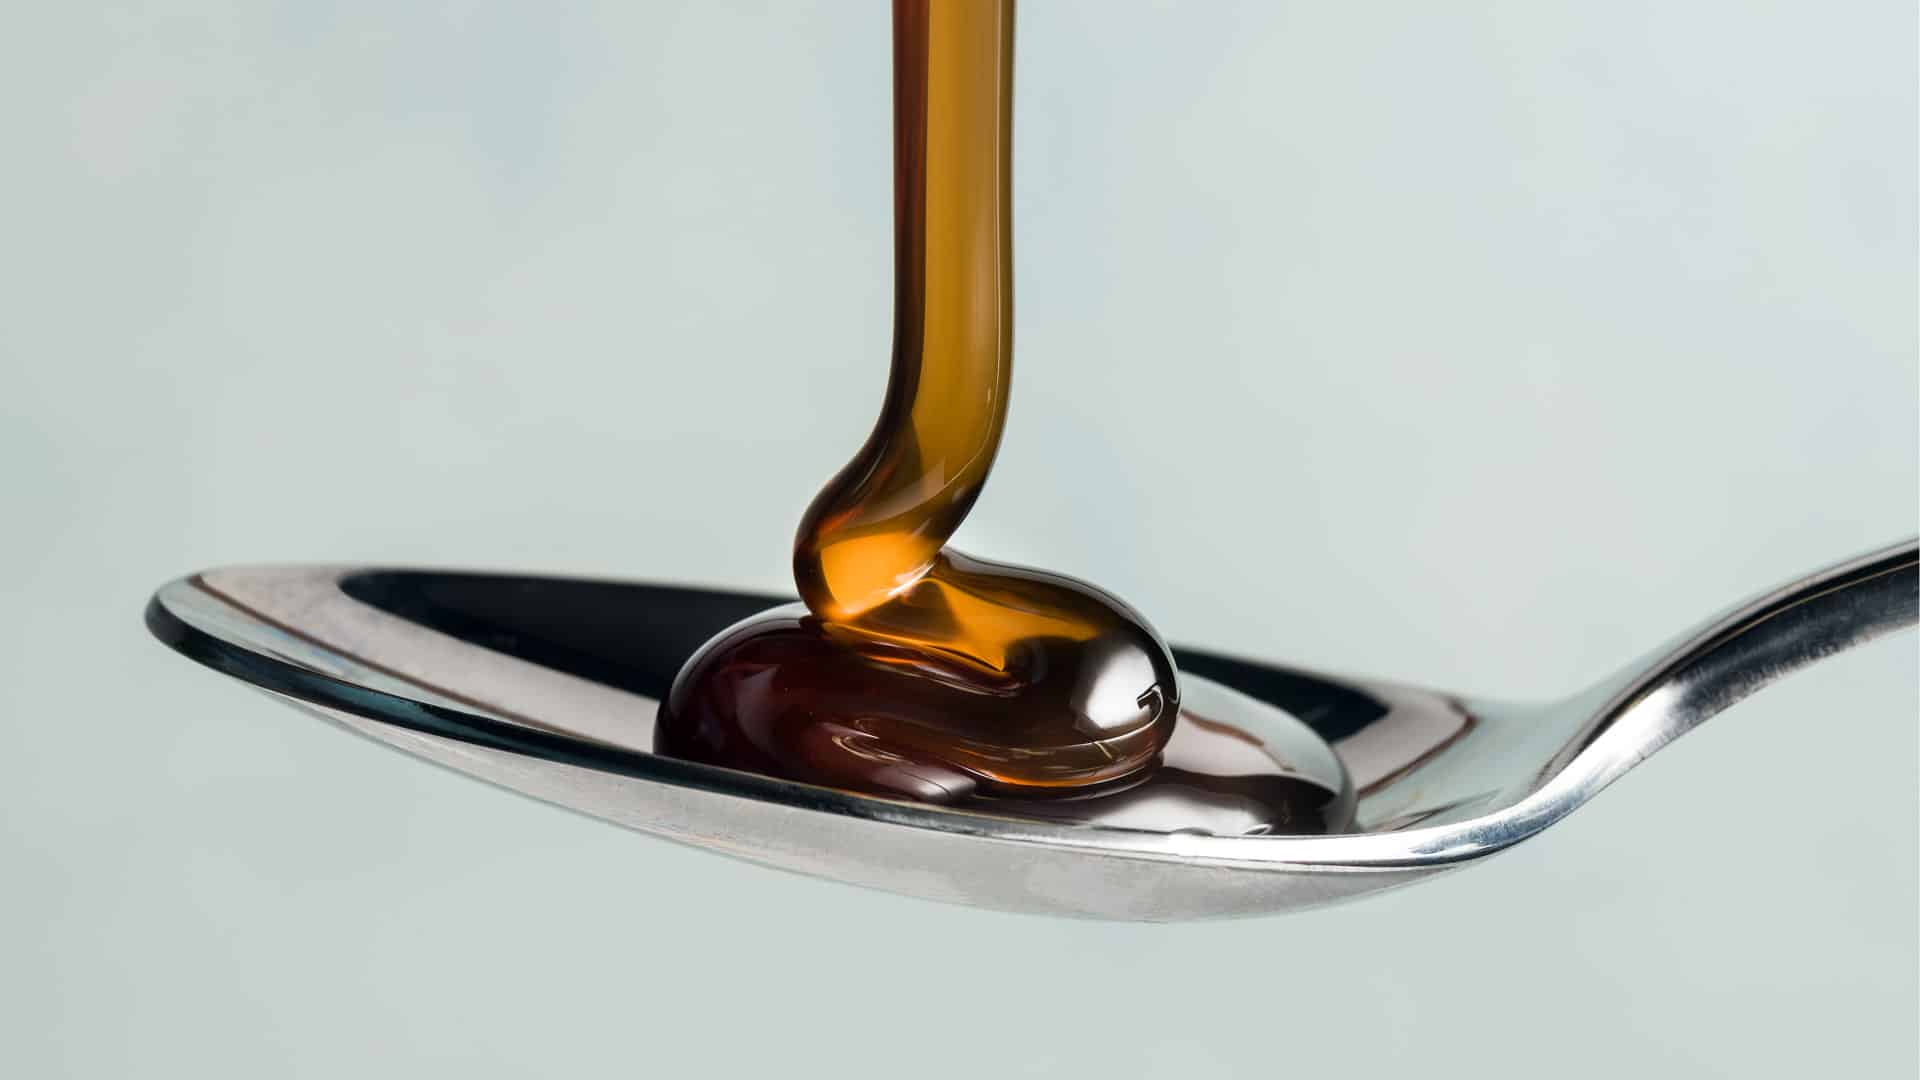 Corn syrup being poured on to a spoon.